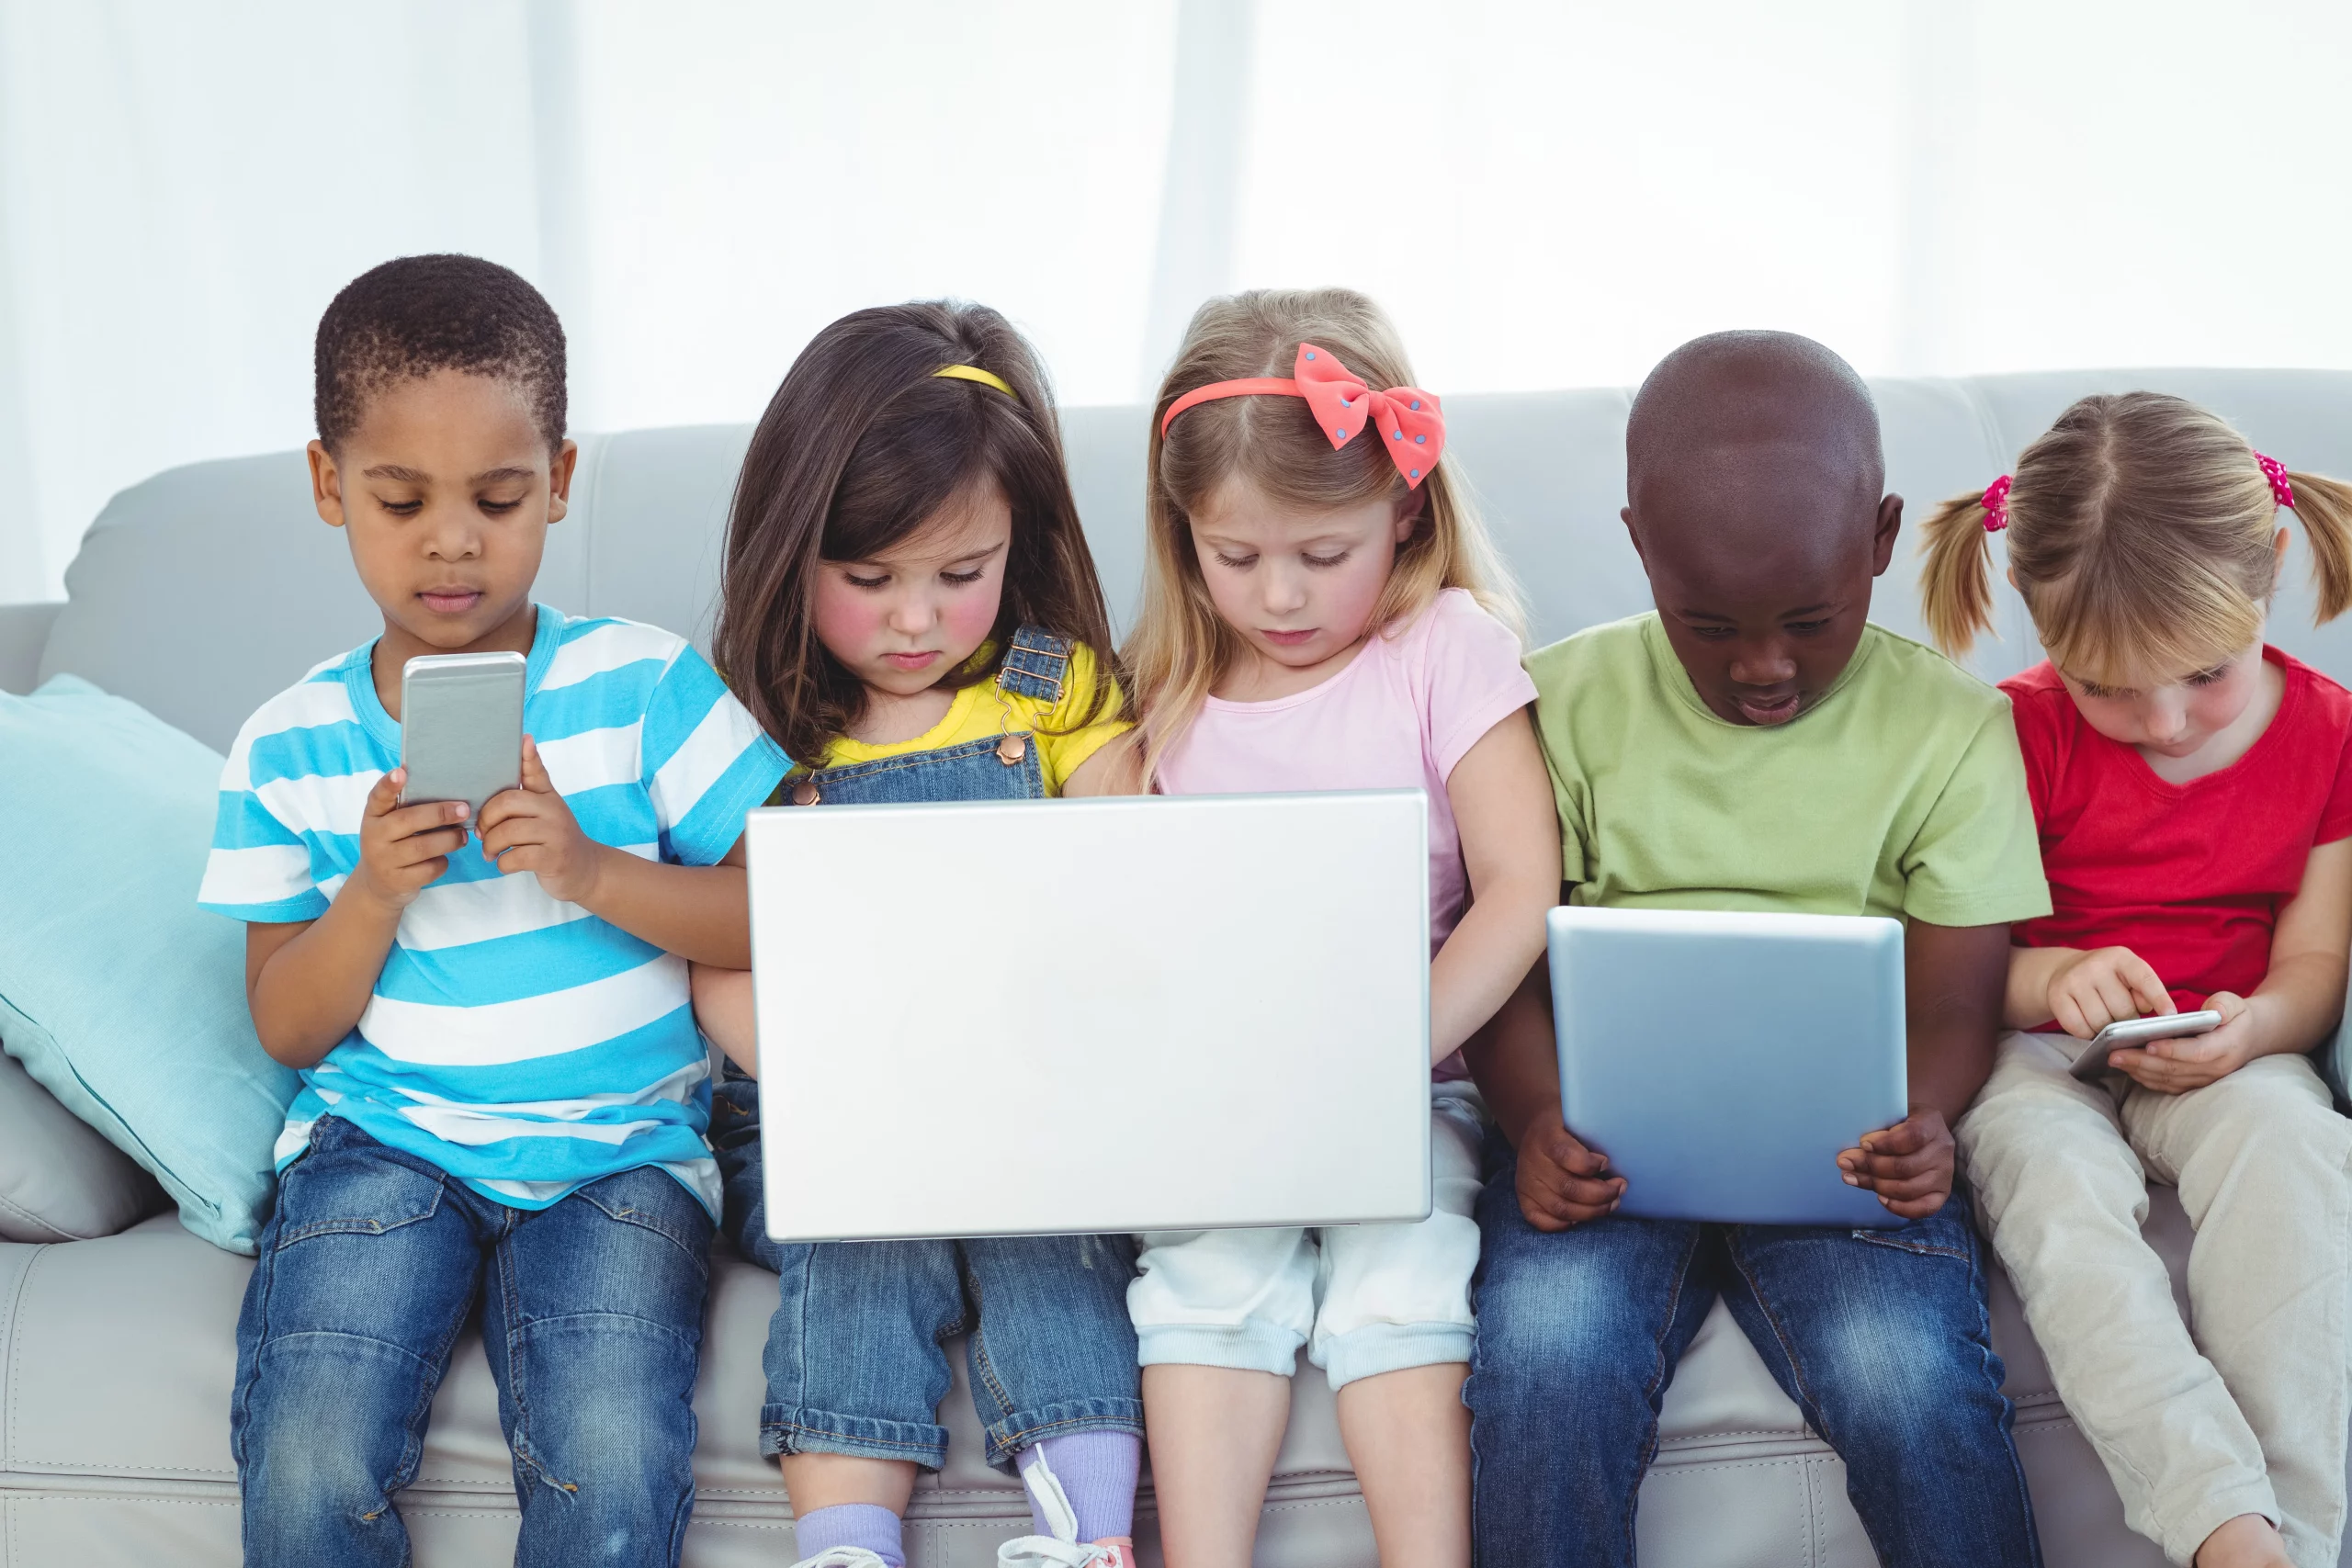 The impact of technology on children’s communication